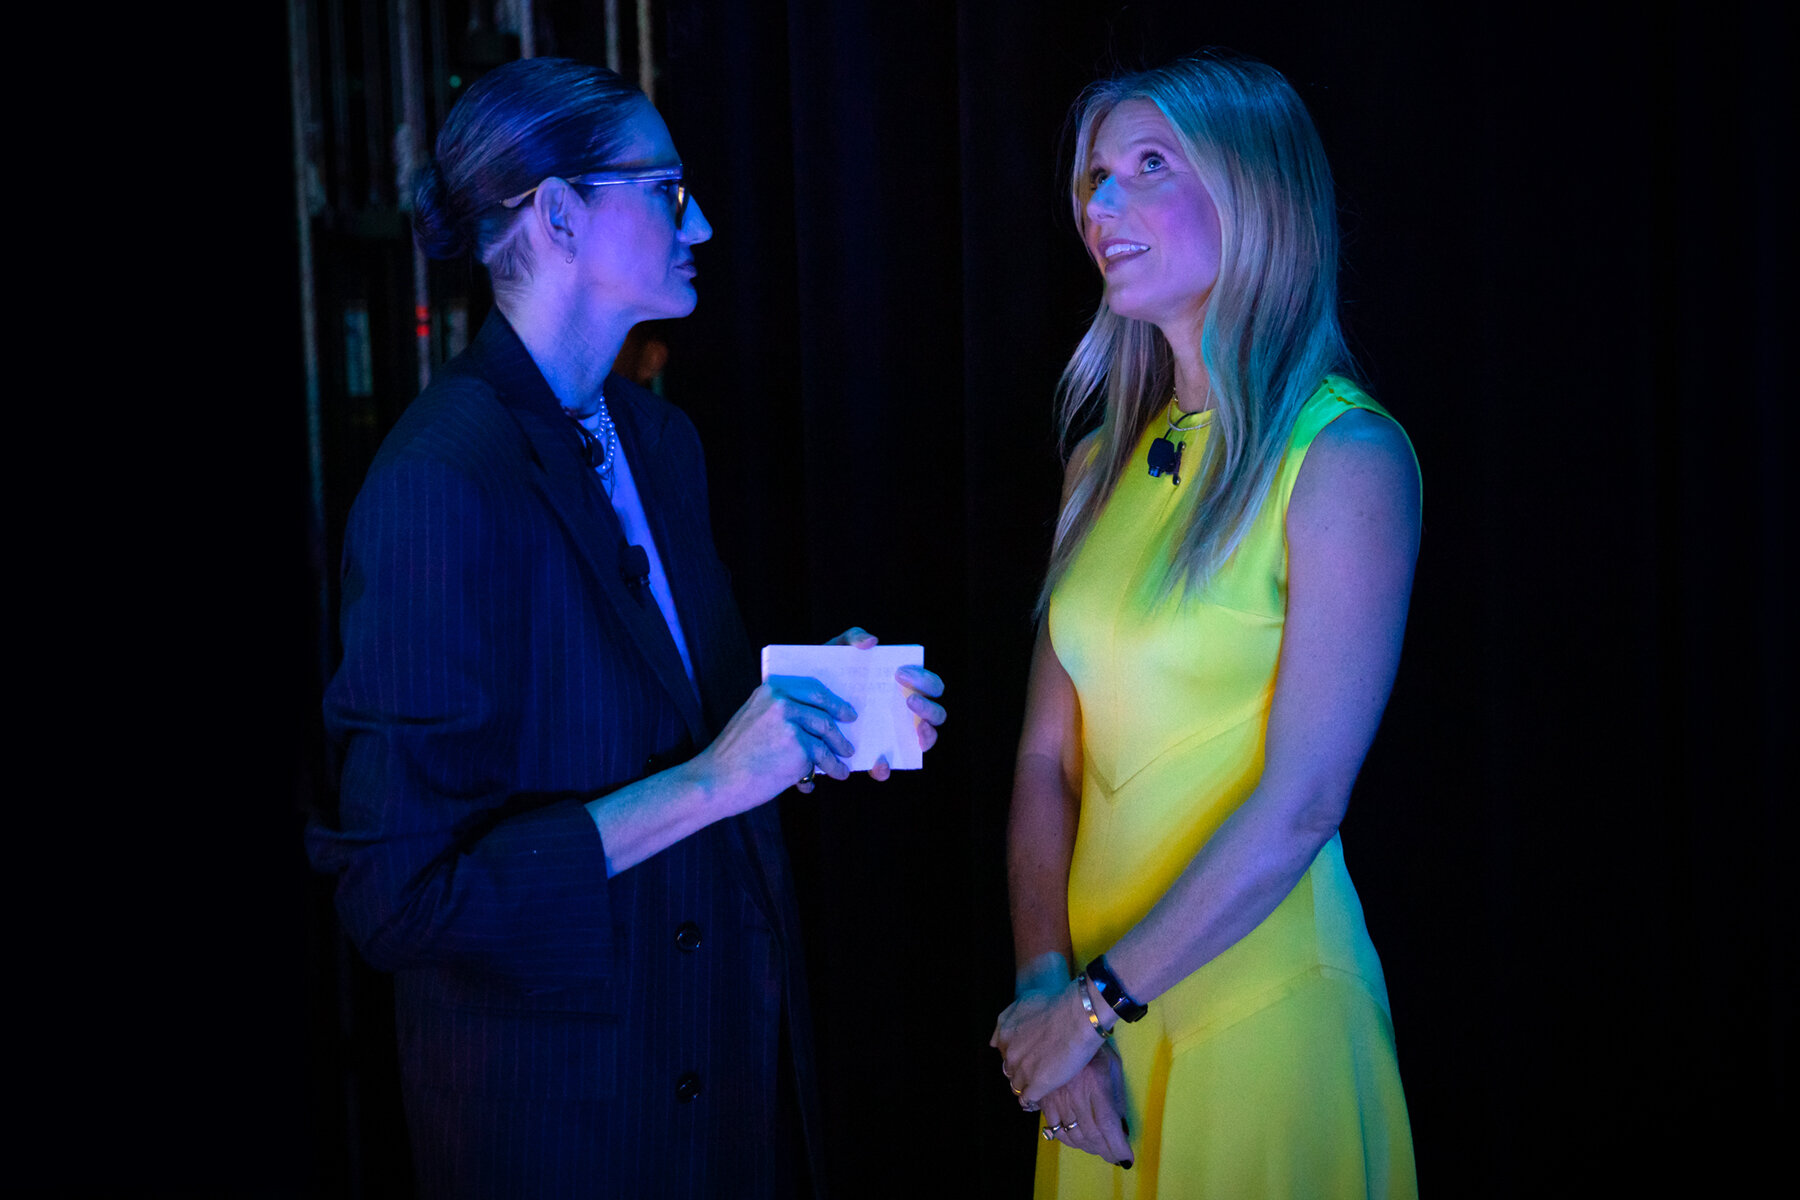 Jenna Lyons and Gweneth Paltrow backstage - 2019